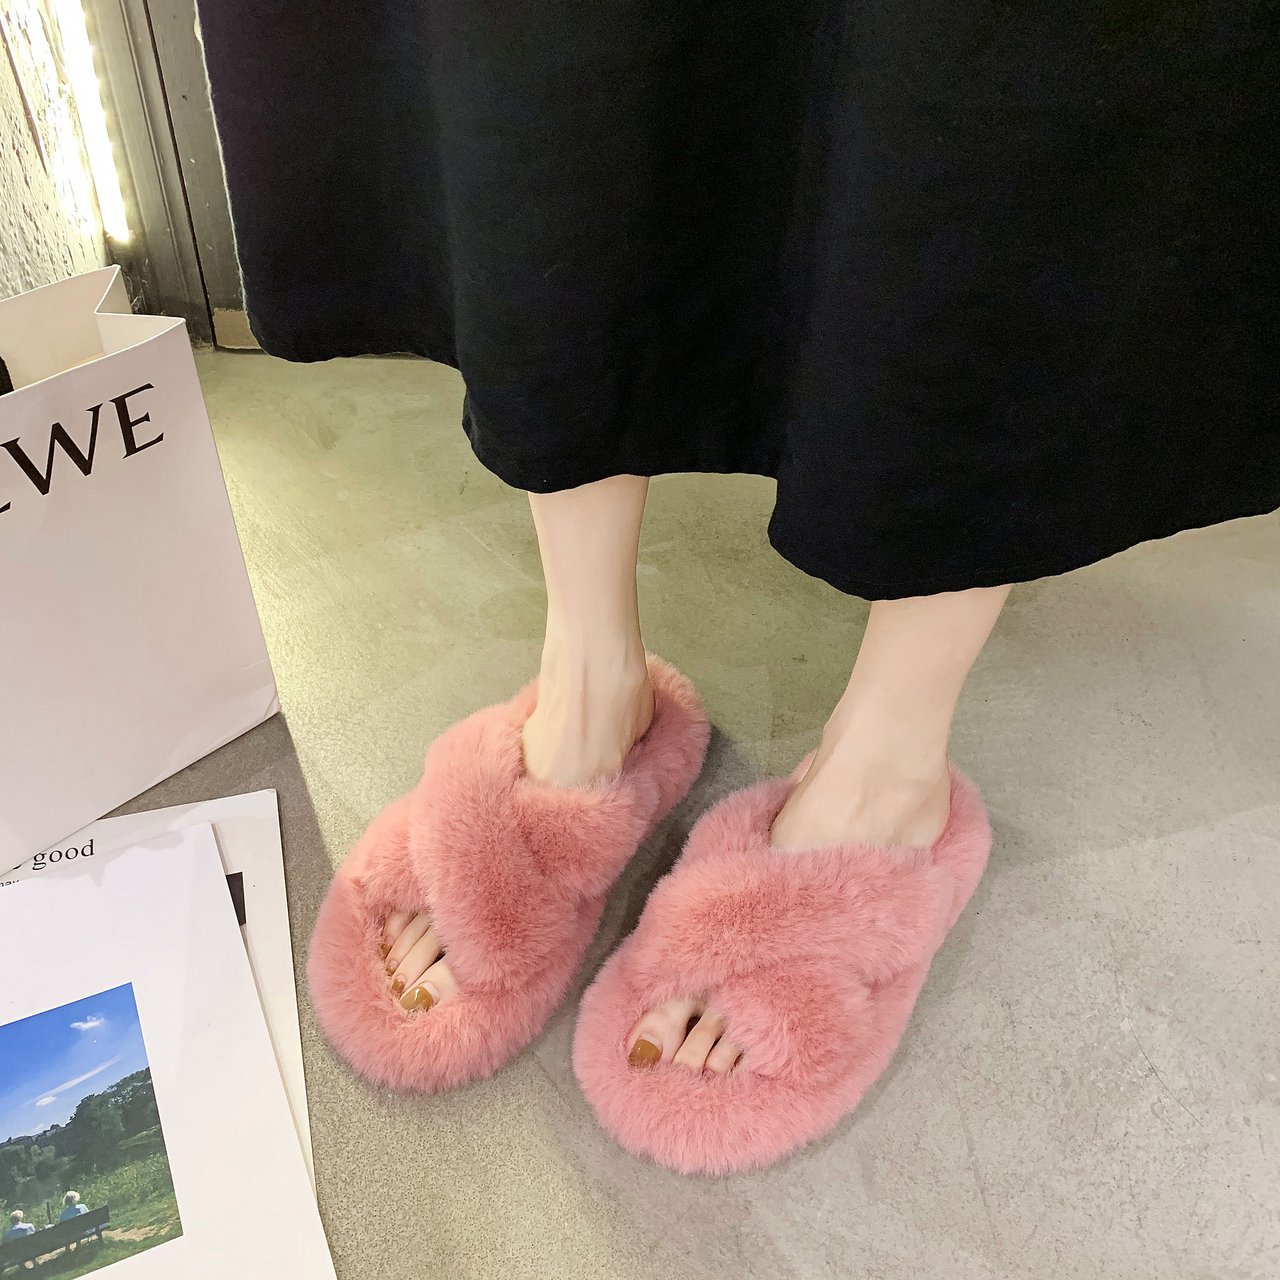 Winter House Women Fur Slippers Fashion Cross Band Warm Plush Ladies Fluffy Shoes Cozy Open Toe Indoor Fuzzy Slides For Girls